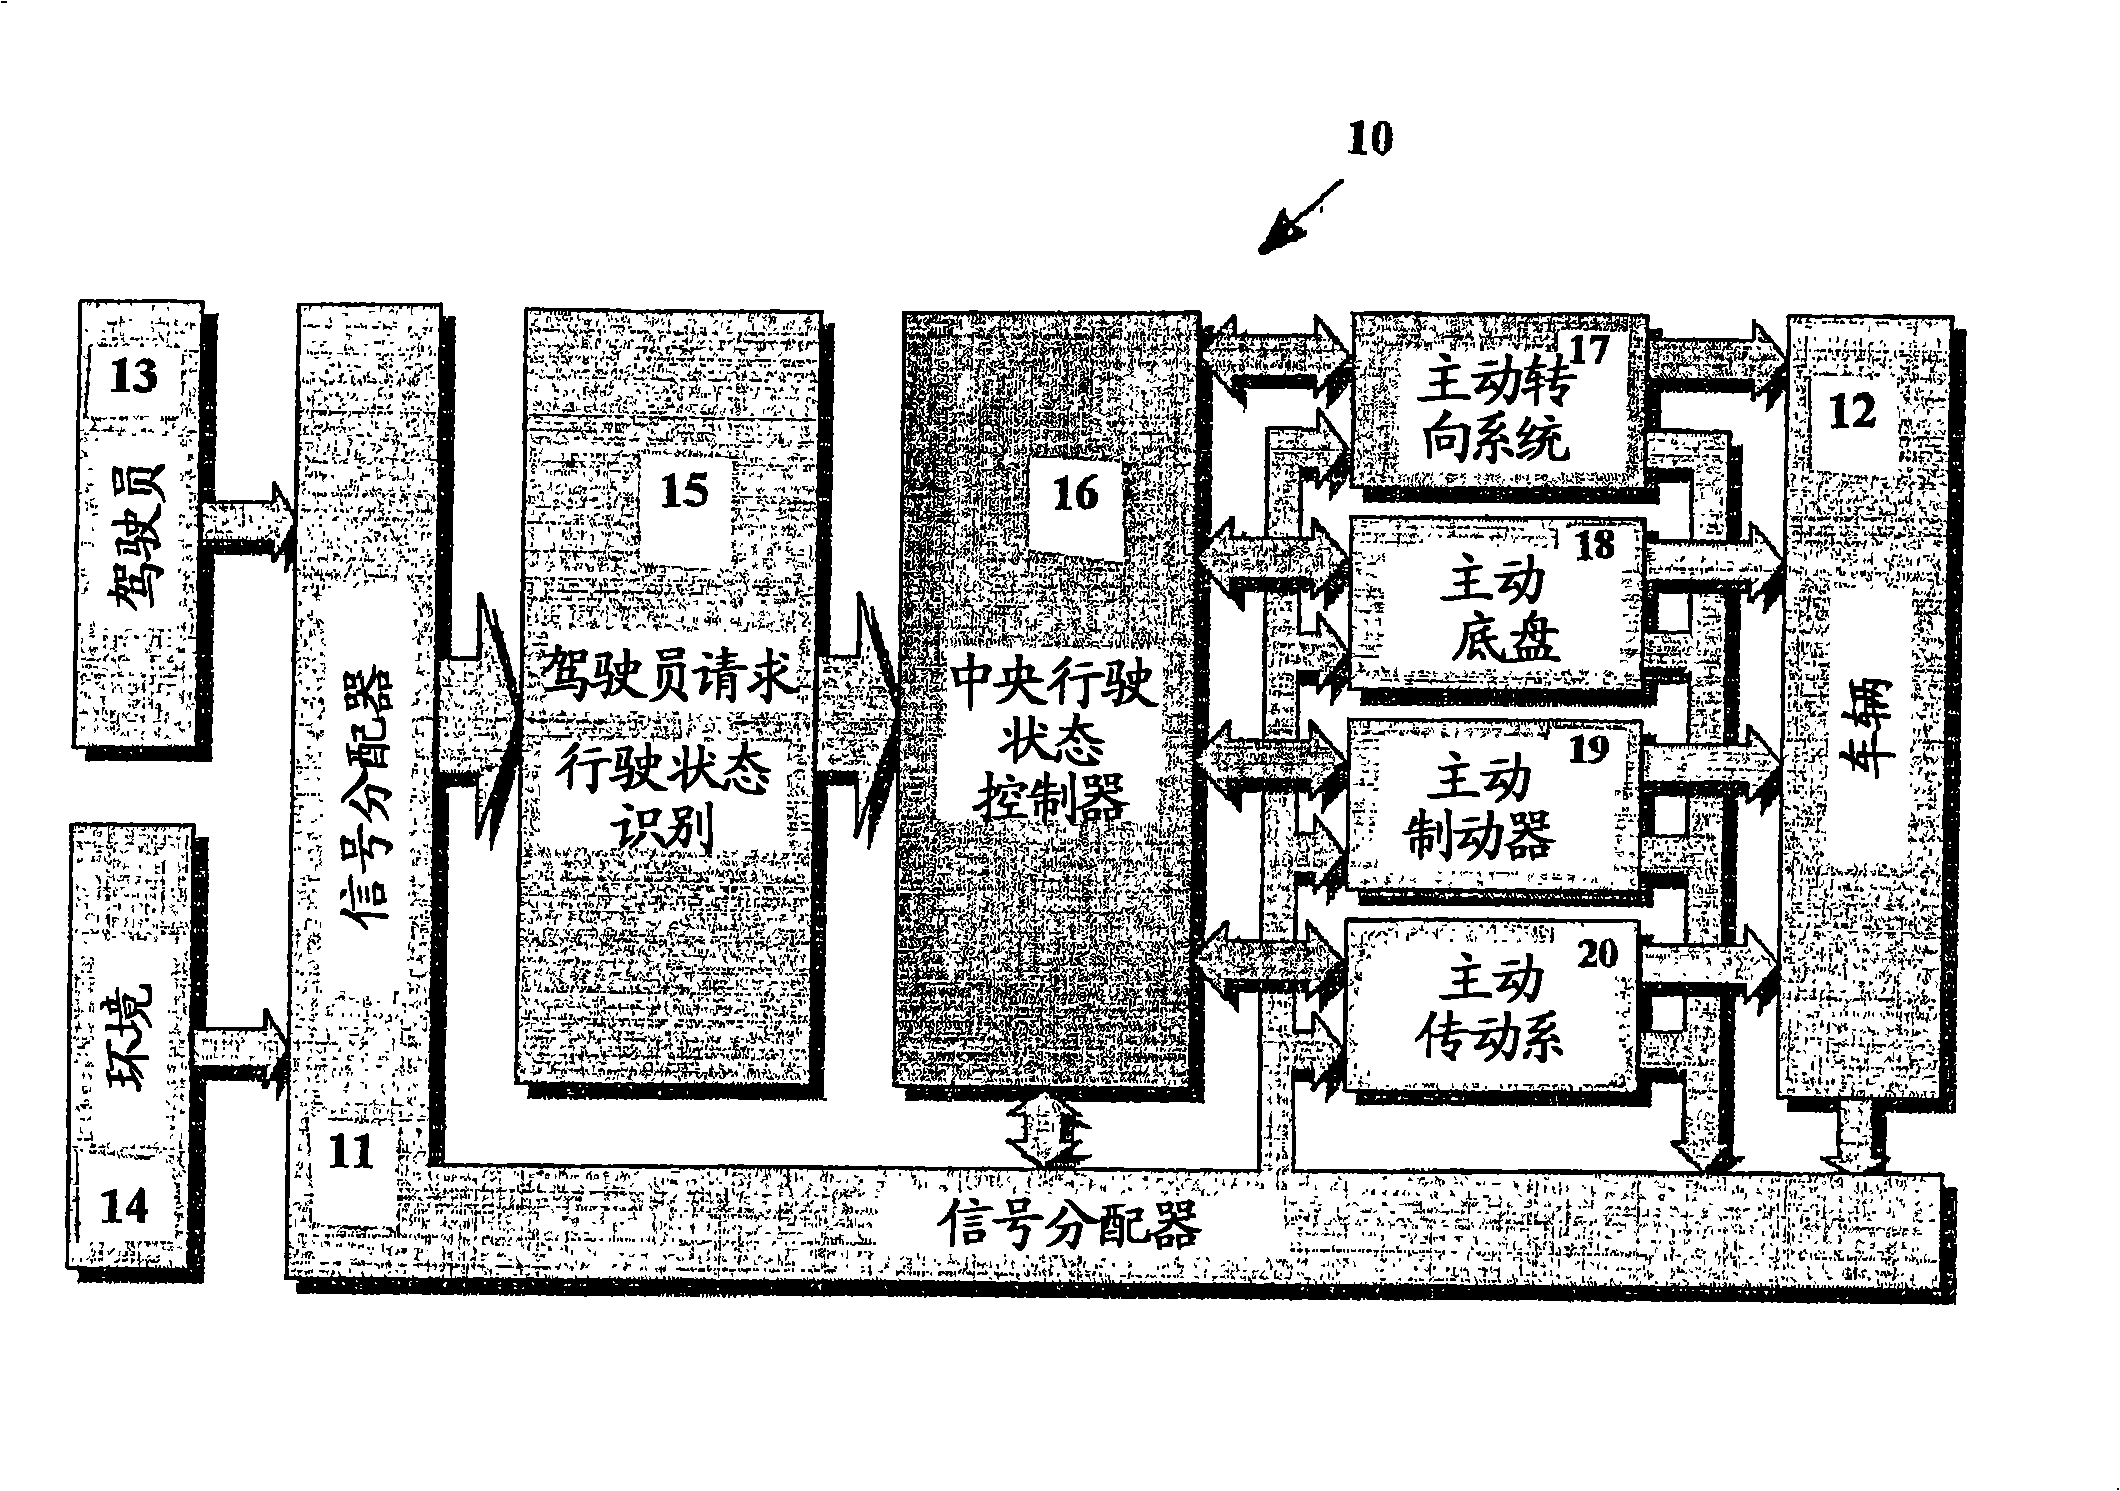 Driving dynamics control system for vehicles